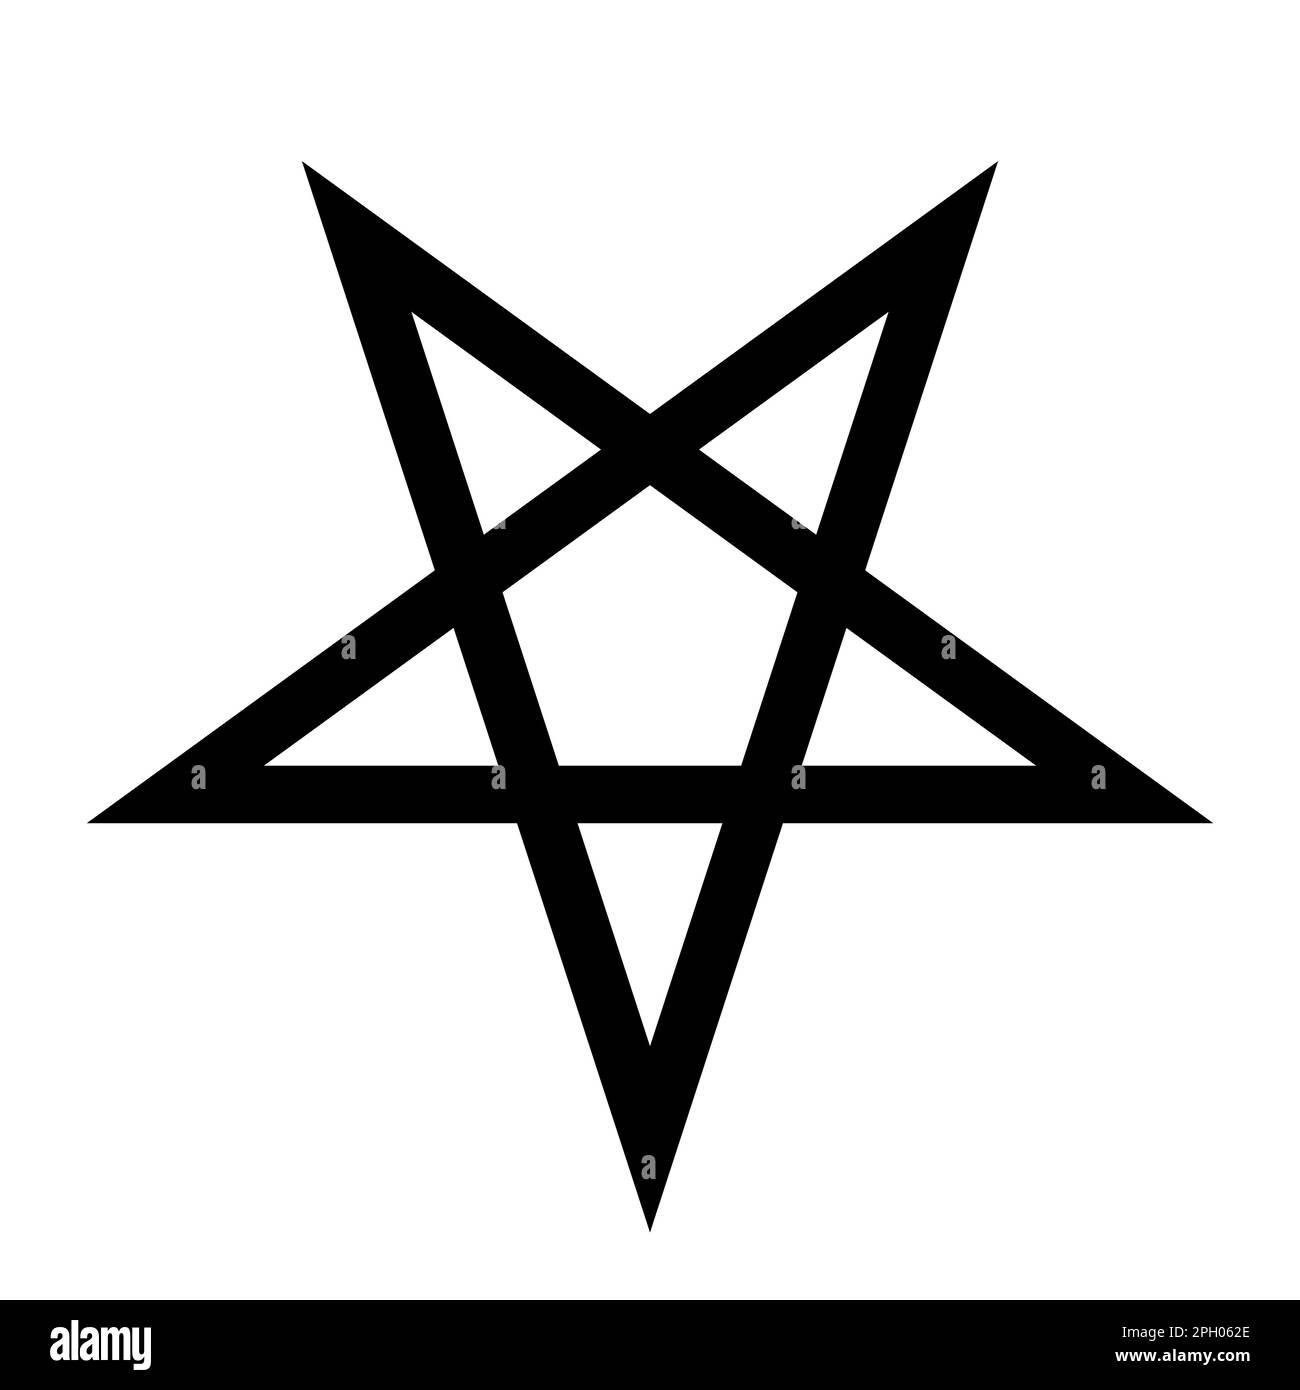 Pentagram - vector illustration of simple five-pointed star, isolated on white Stock Vector